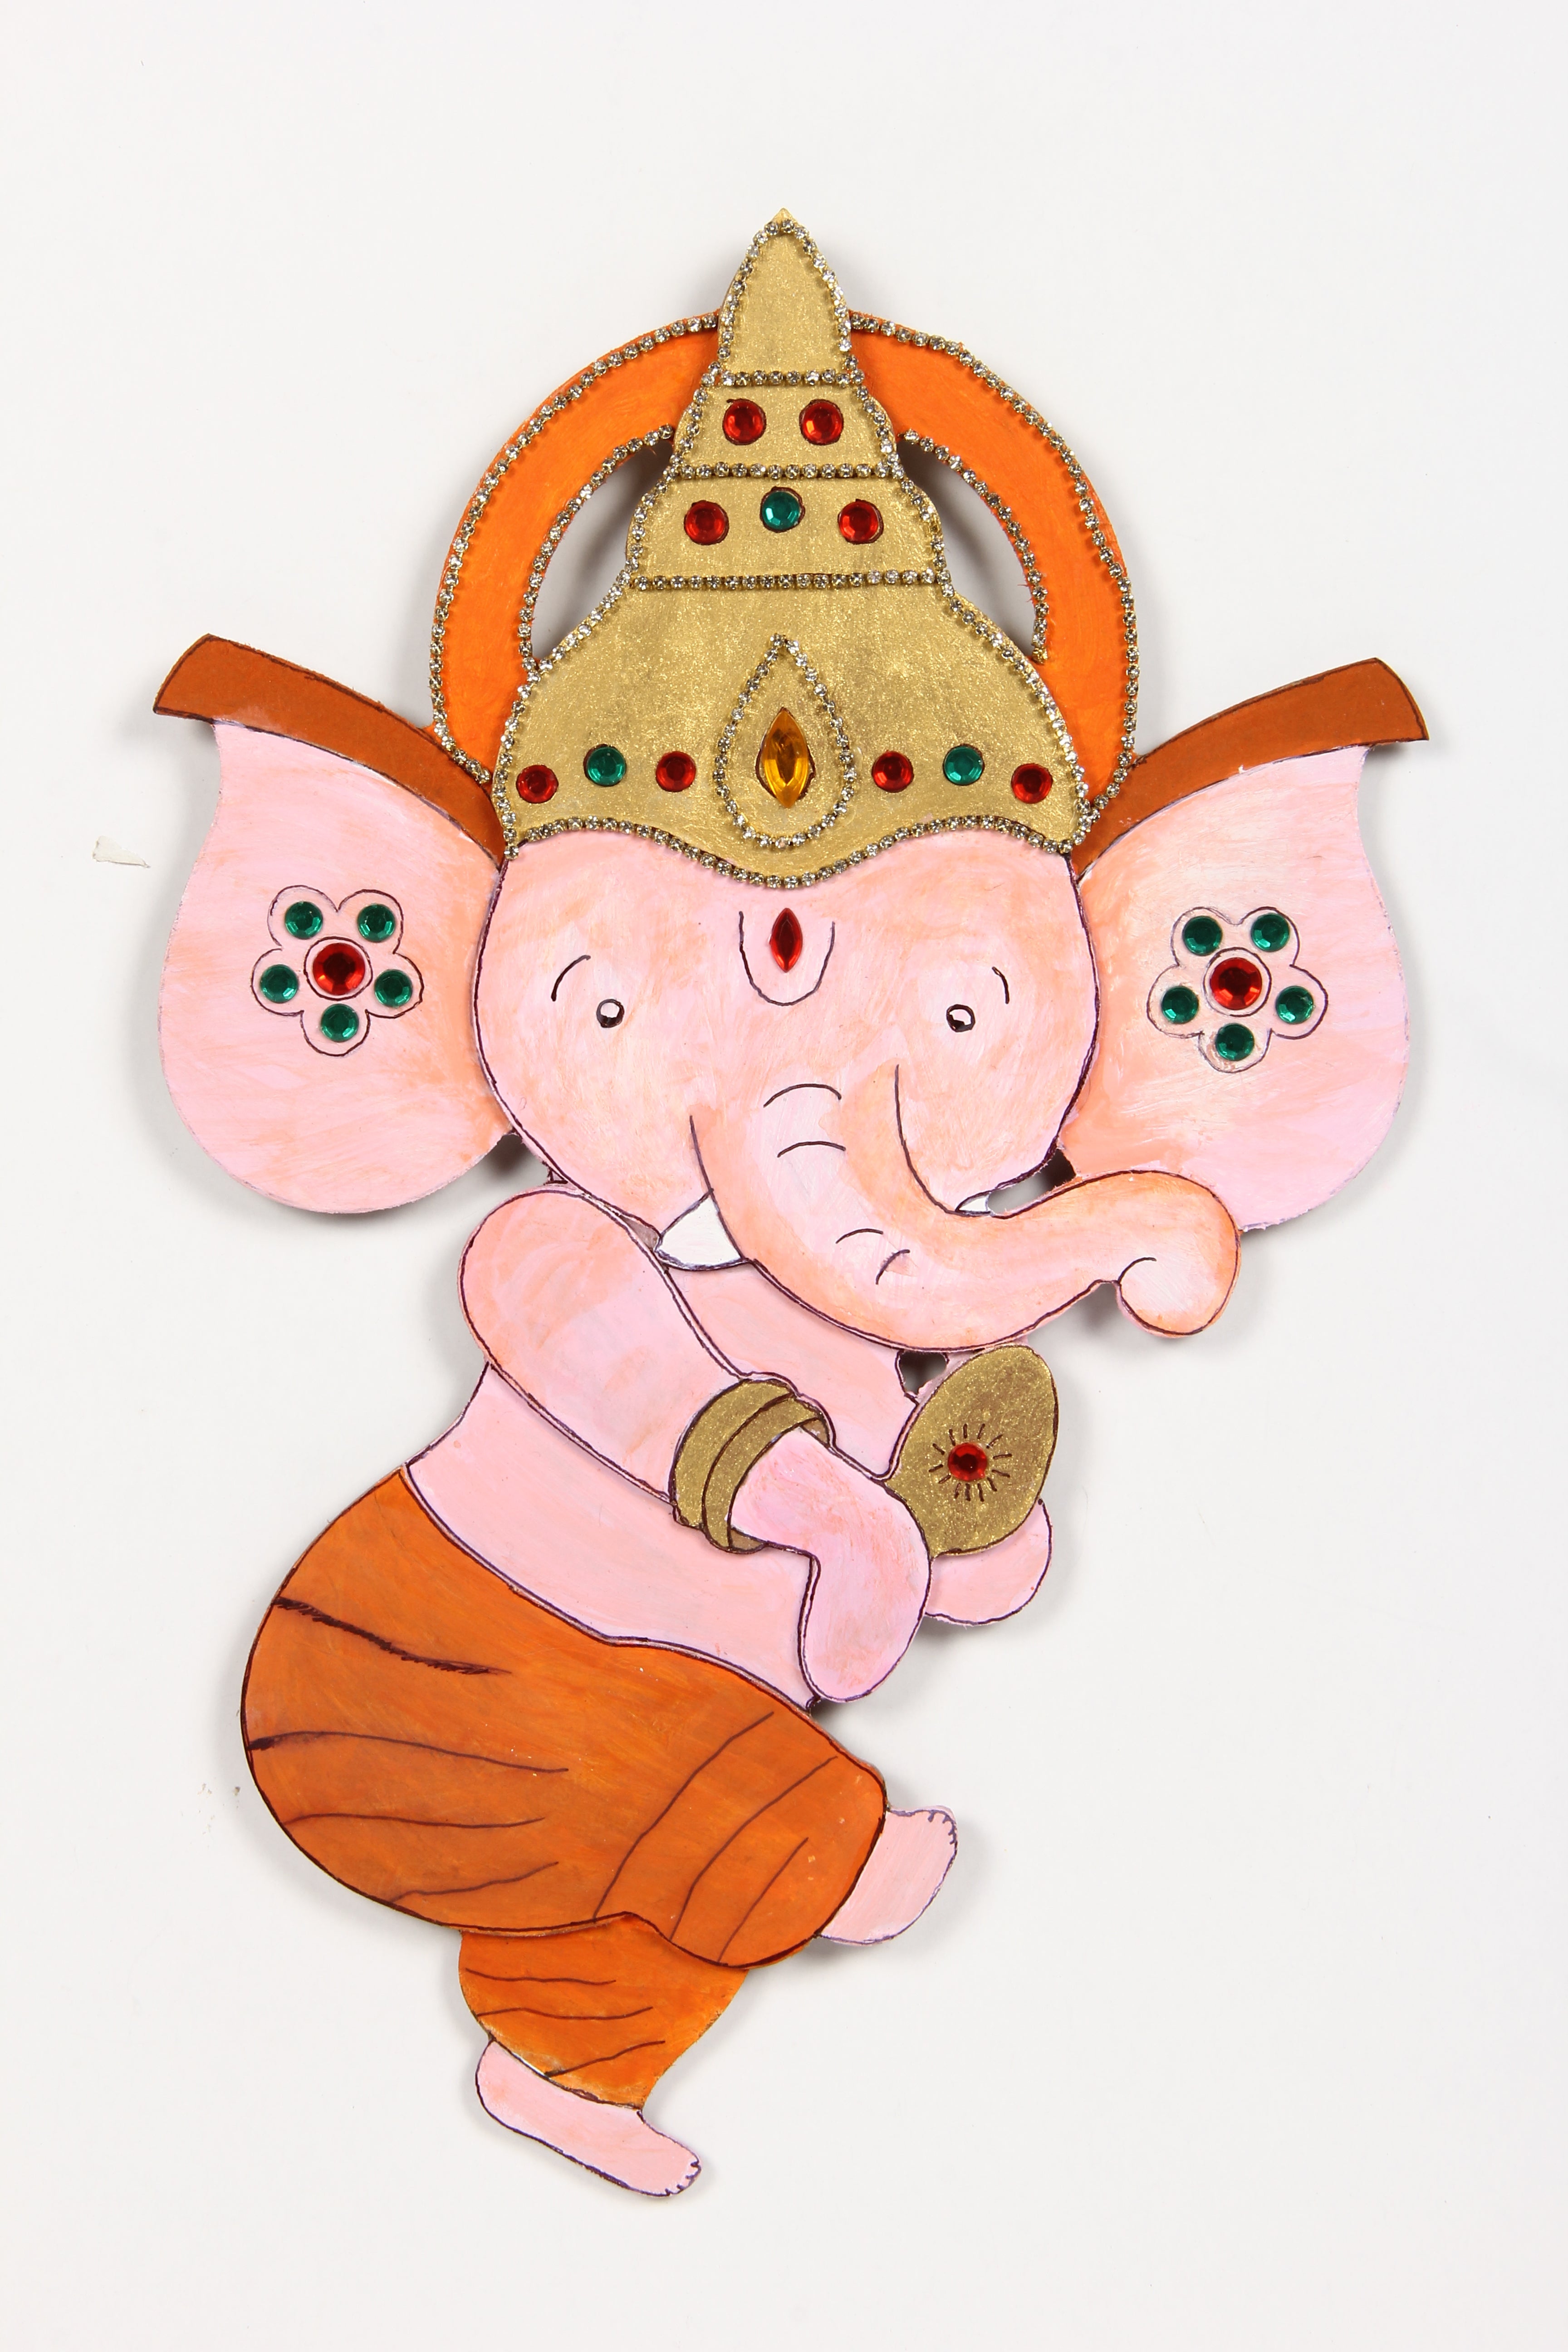 Mdf Pre Marked Dancing Ganesha With Hanging Sawtooth Hook Approx 12 X 8Inch 1Pc Lb